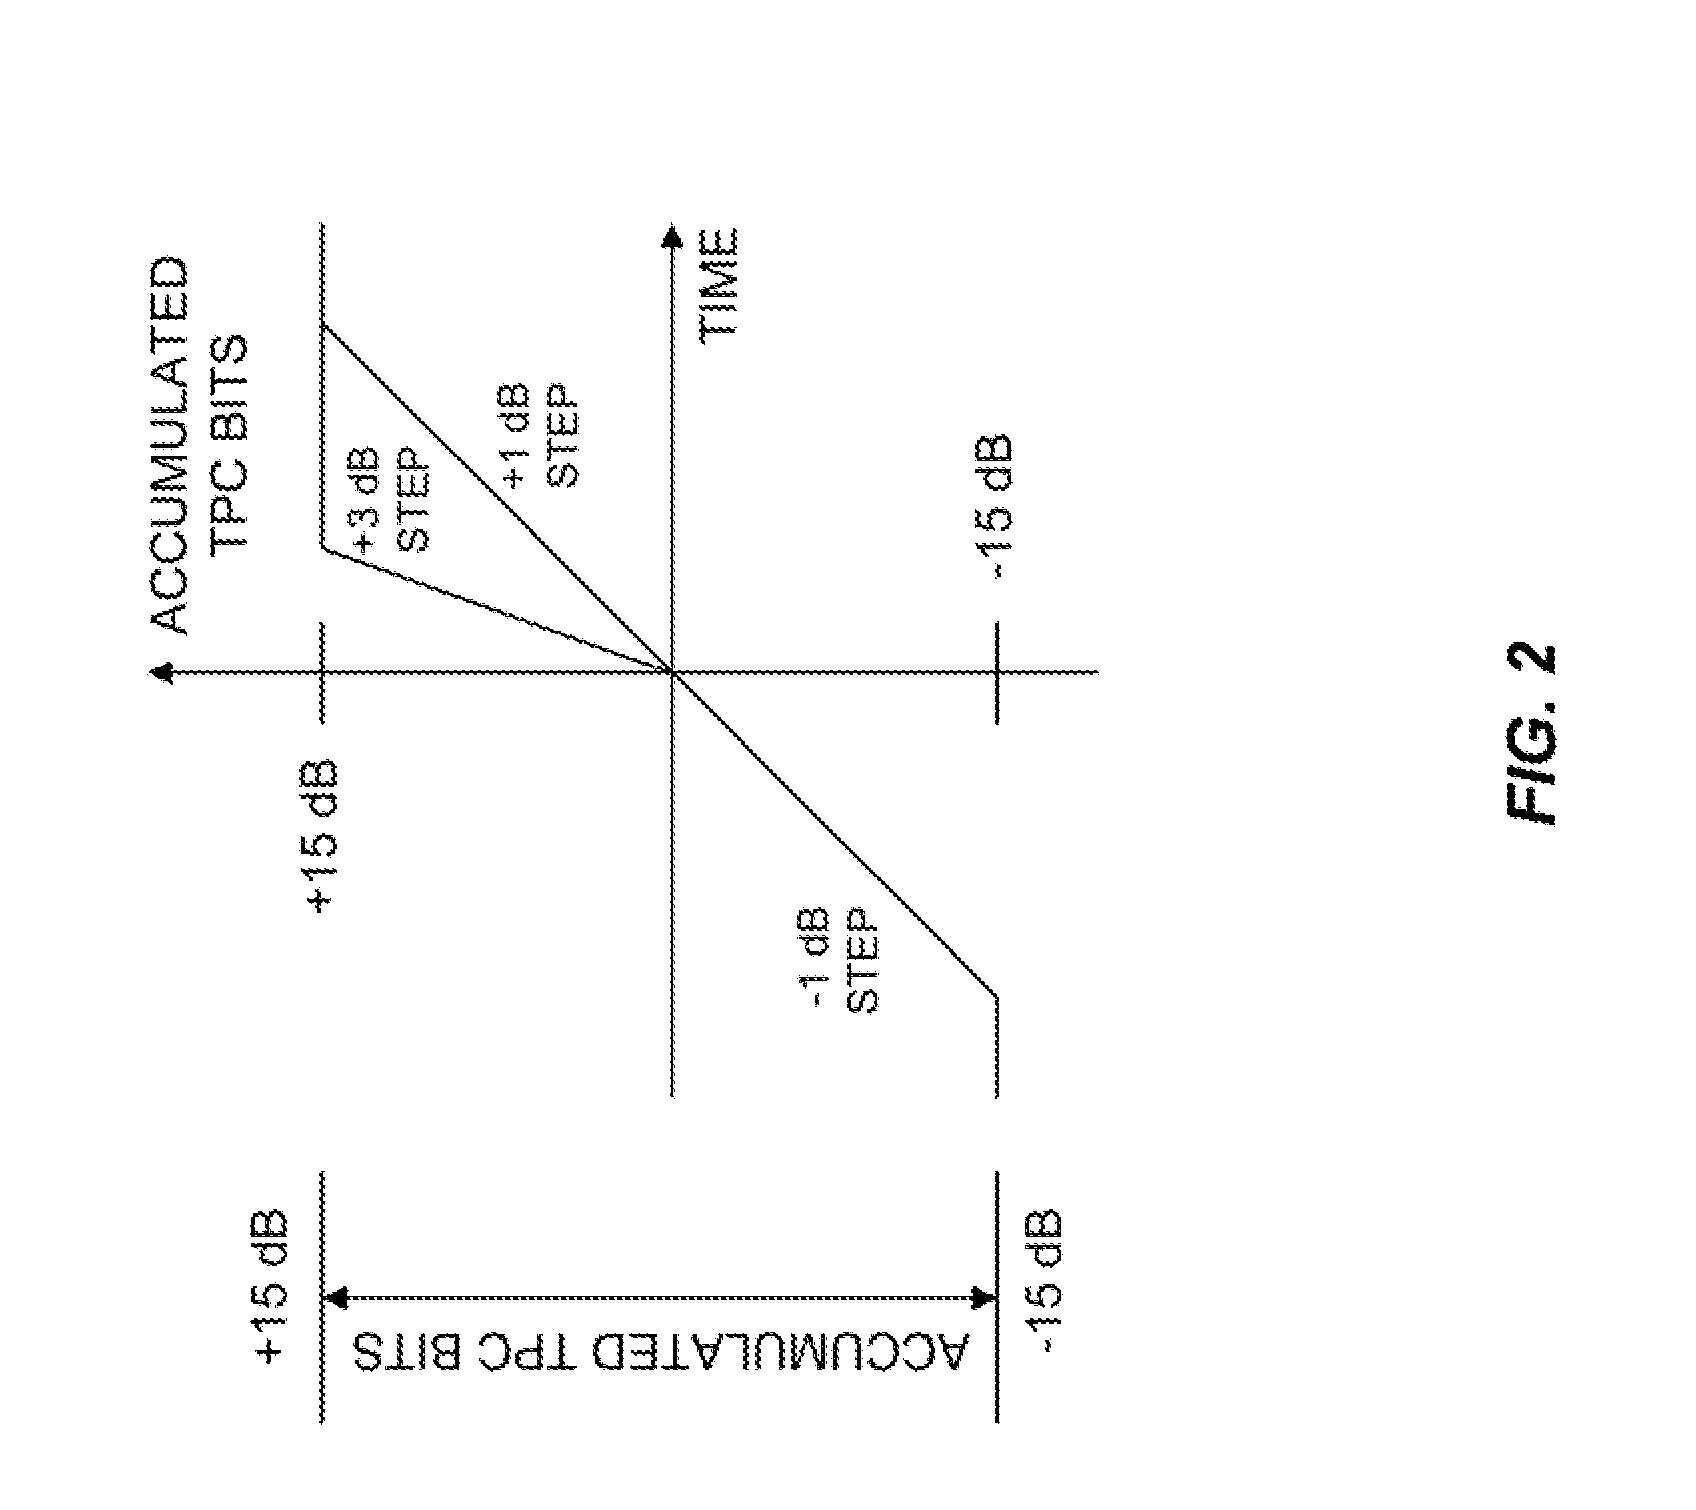 Uplink power alignment estimation in a communication system